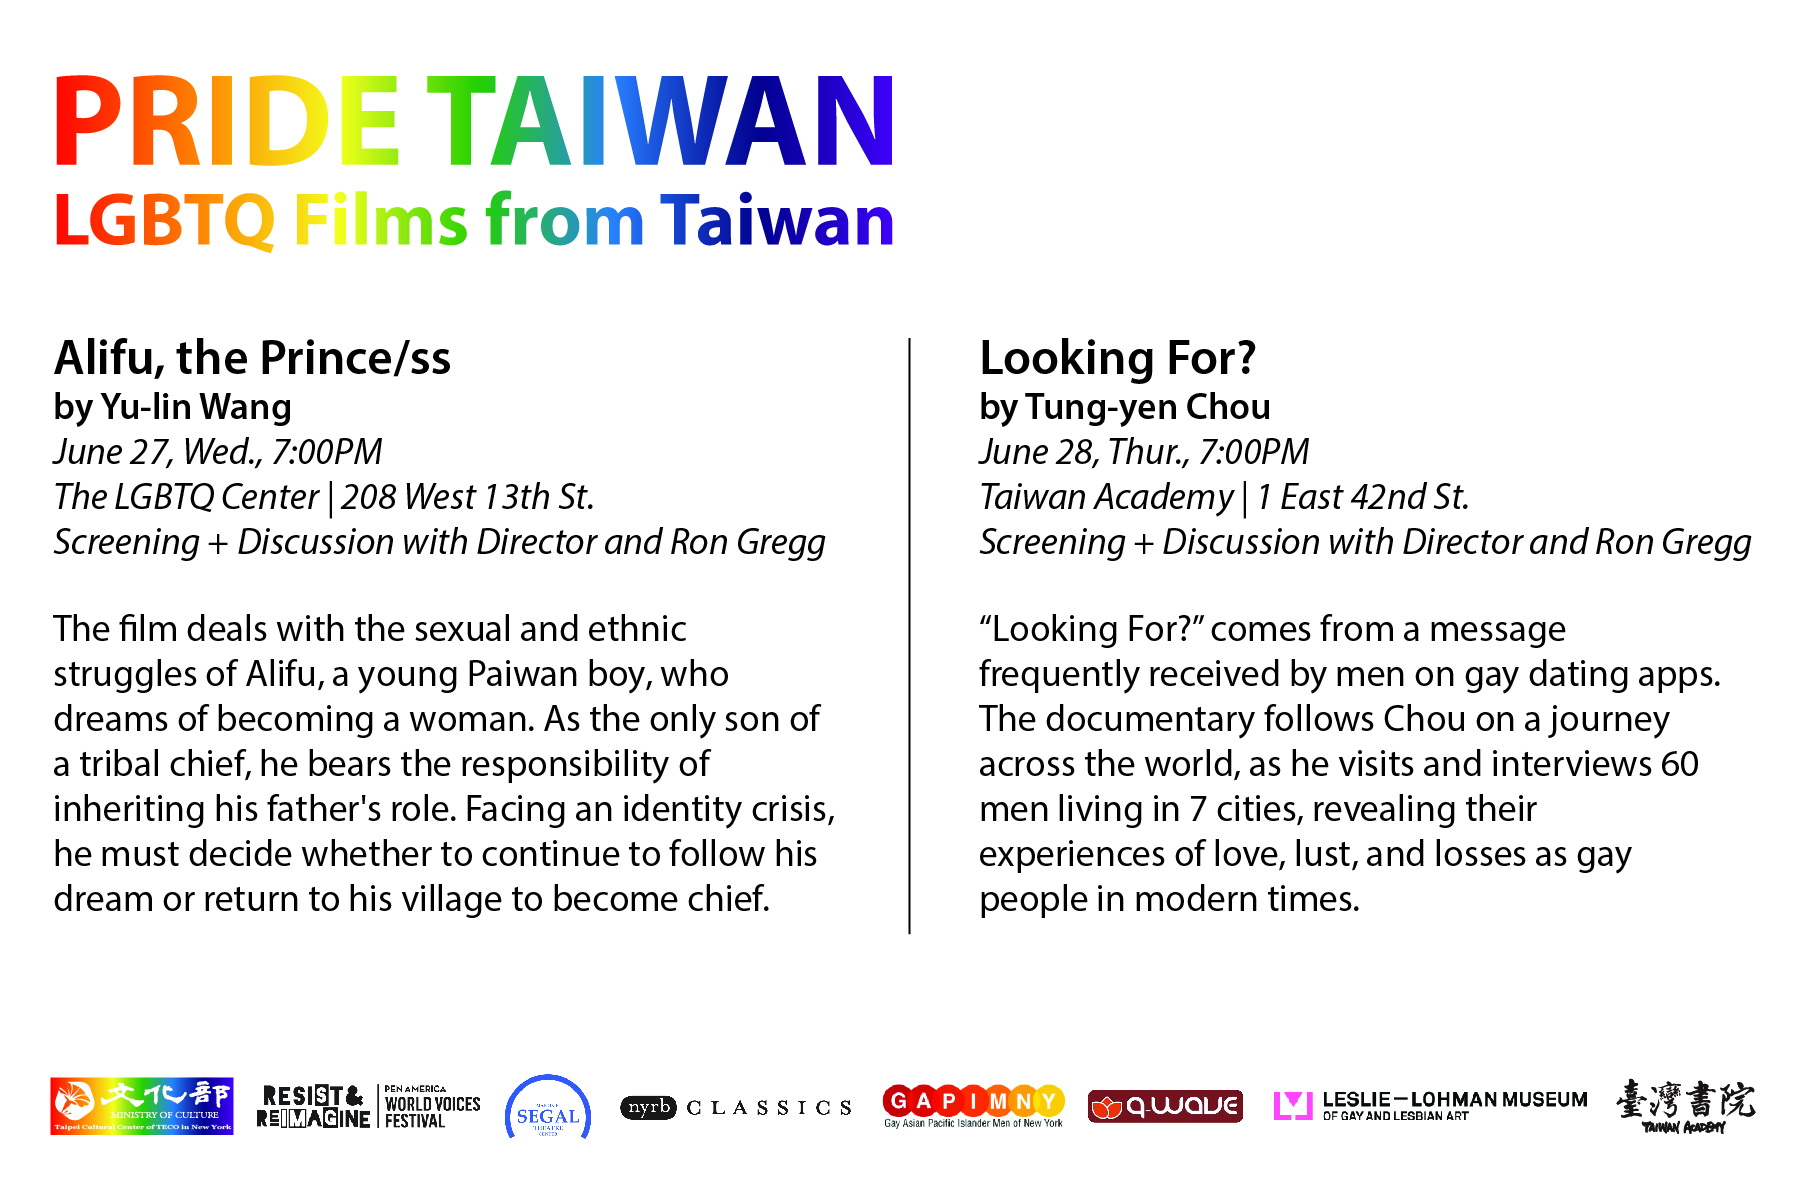 Pride Taiwan: An evening of film screenings and play readings